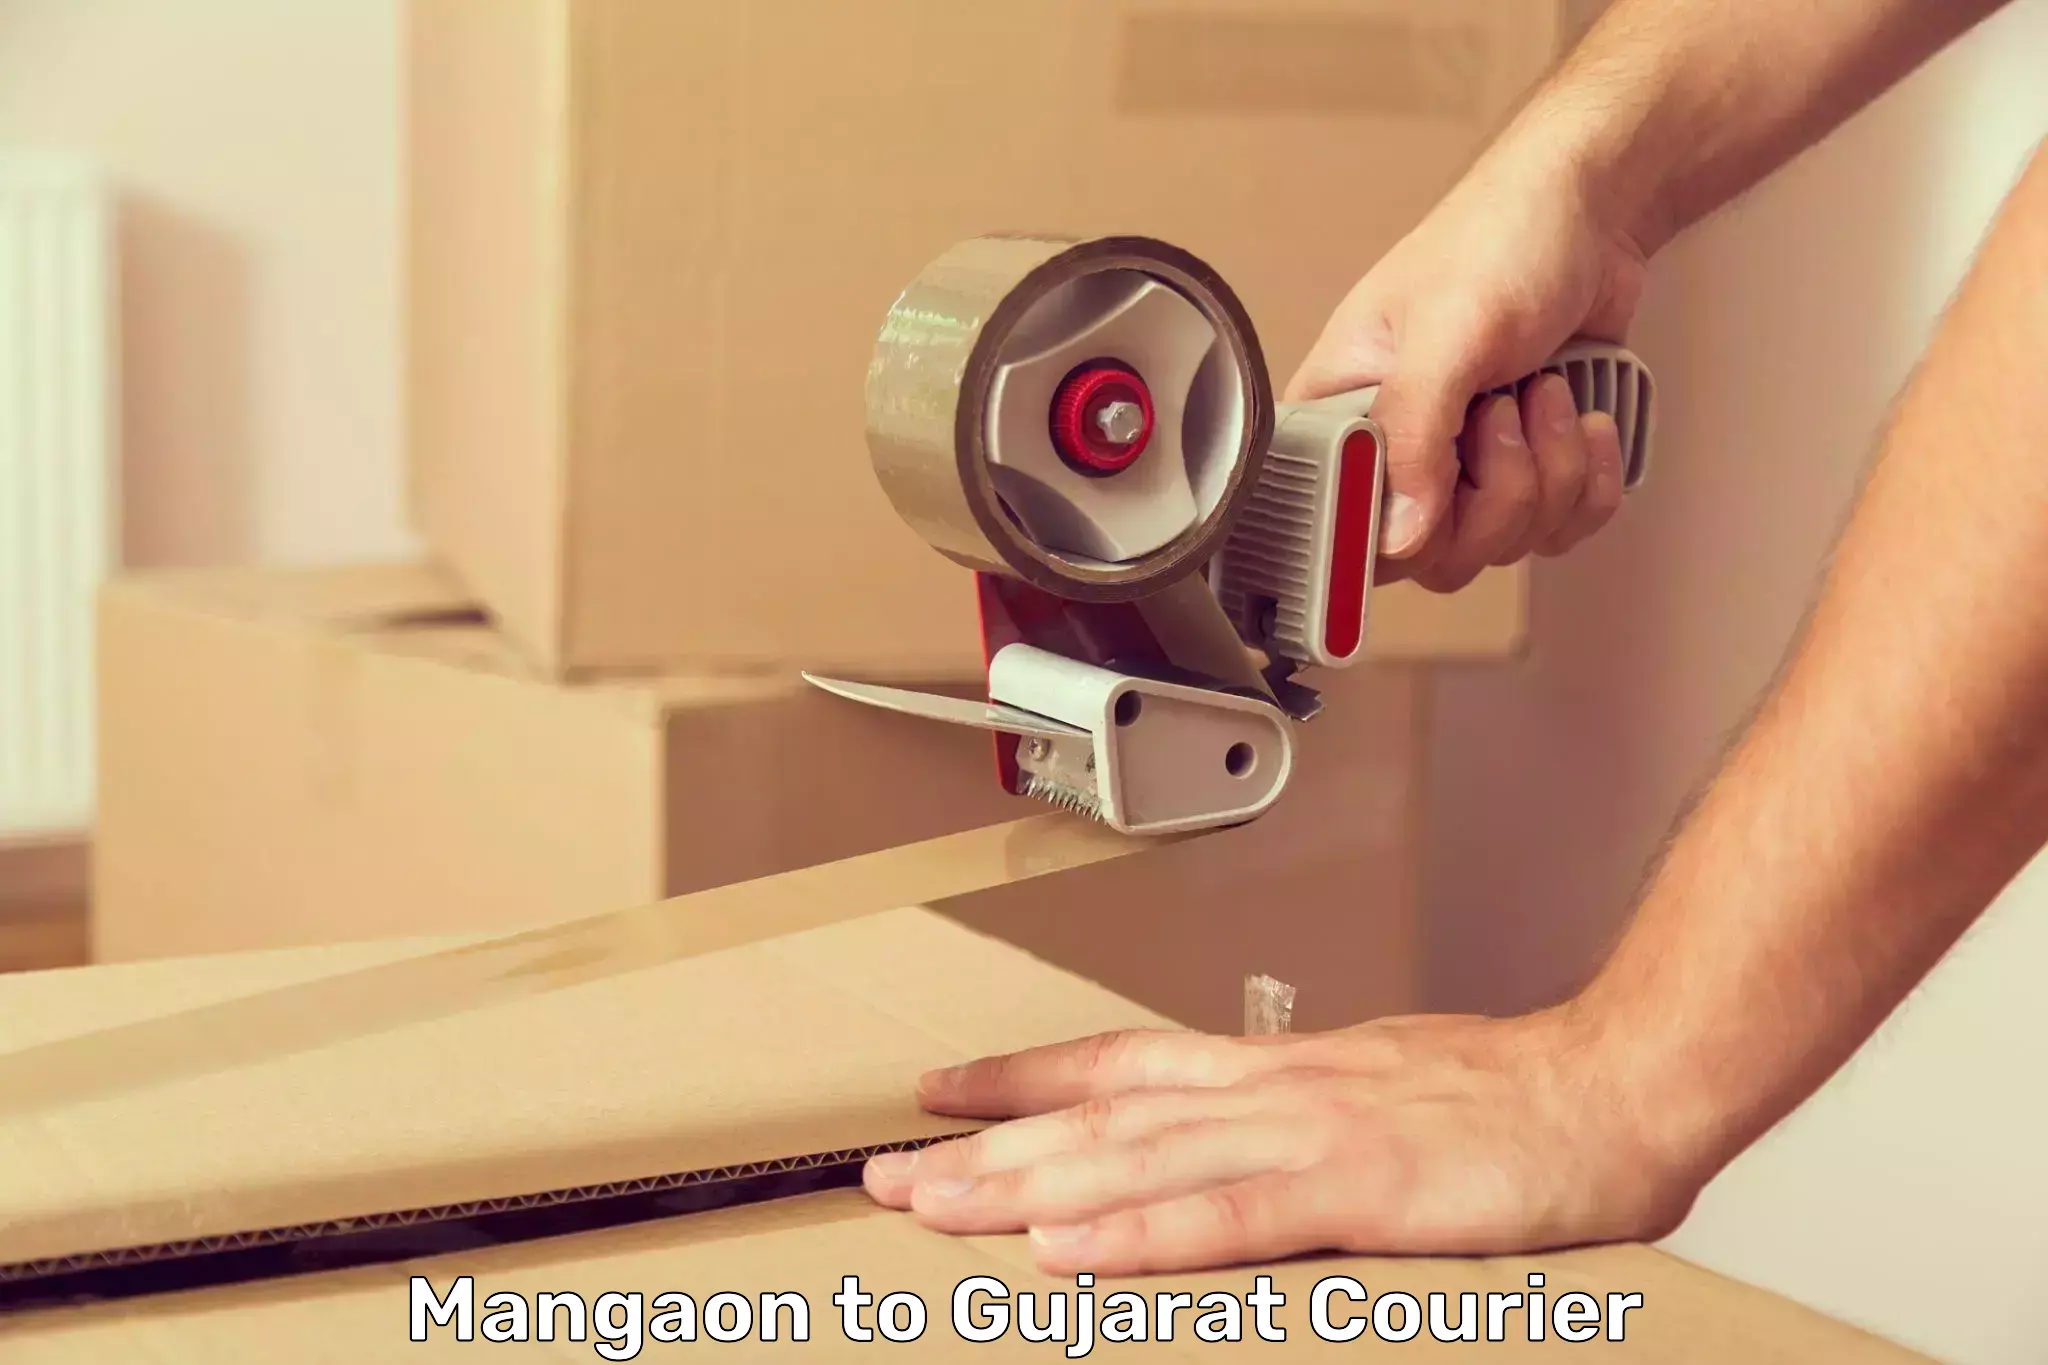 24/7 courier service Mangaon to Anand